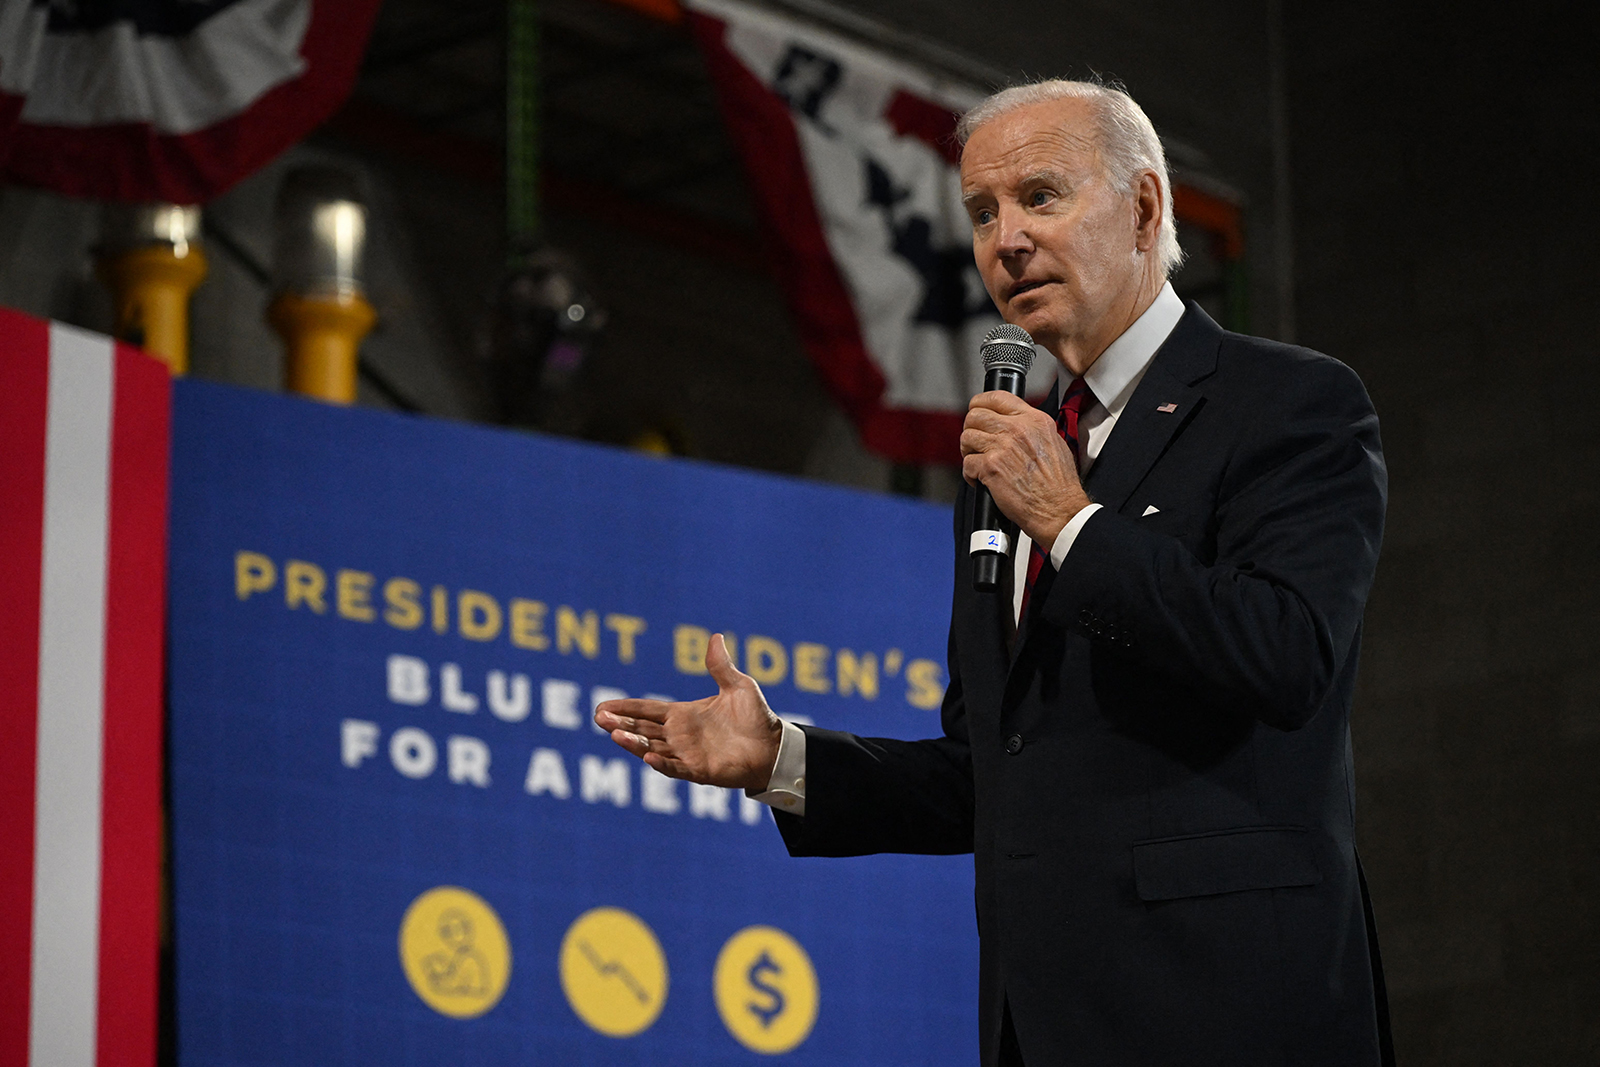 US President Joe Biden spoke today about the economy at Steamfitters Local 602 in Springfield, Virginia,.